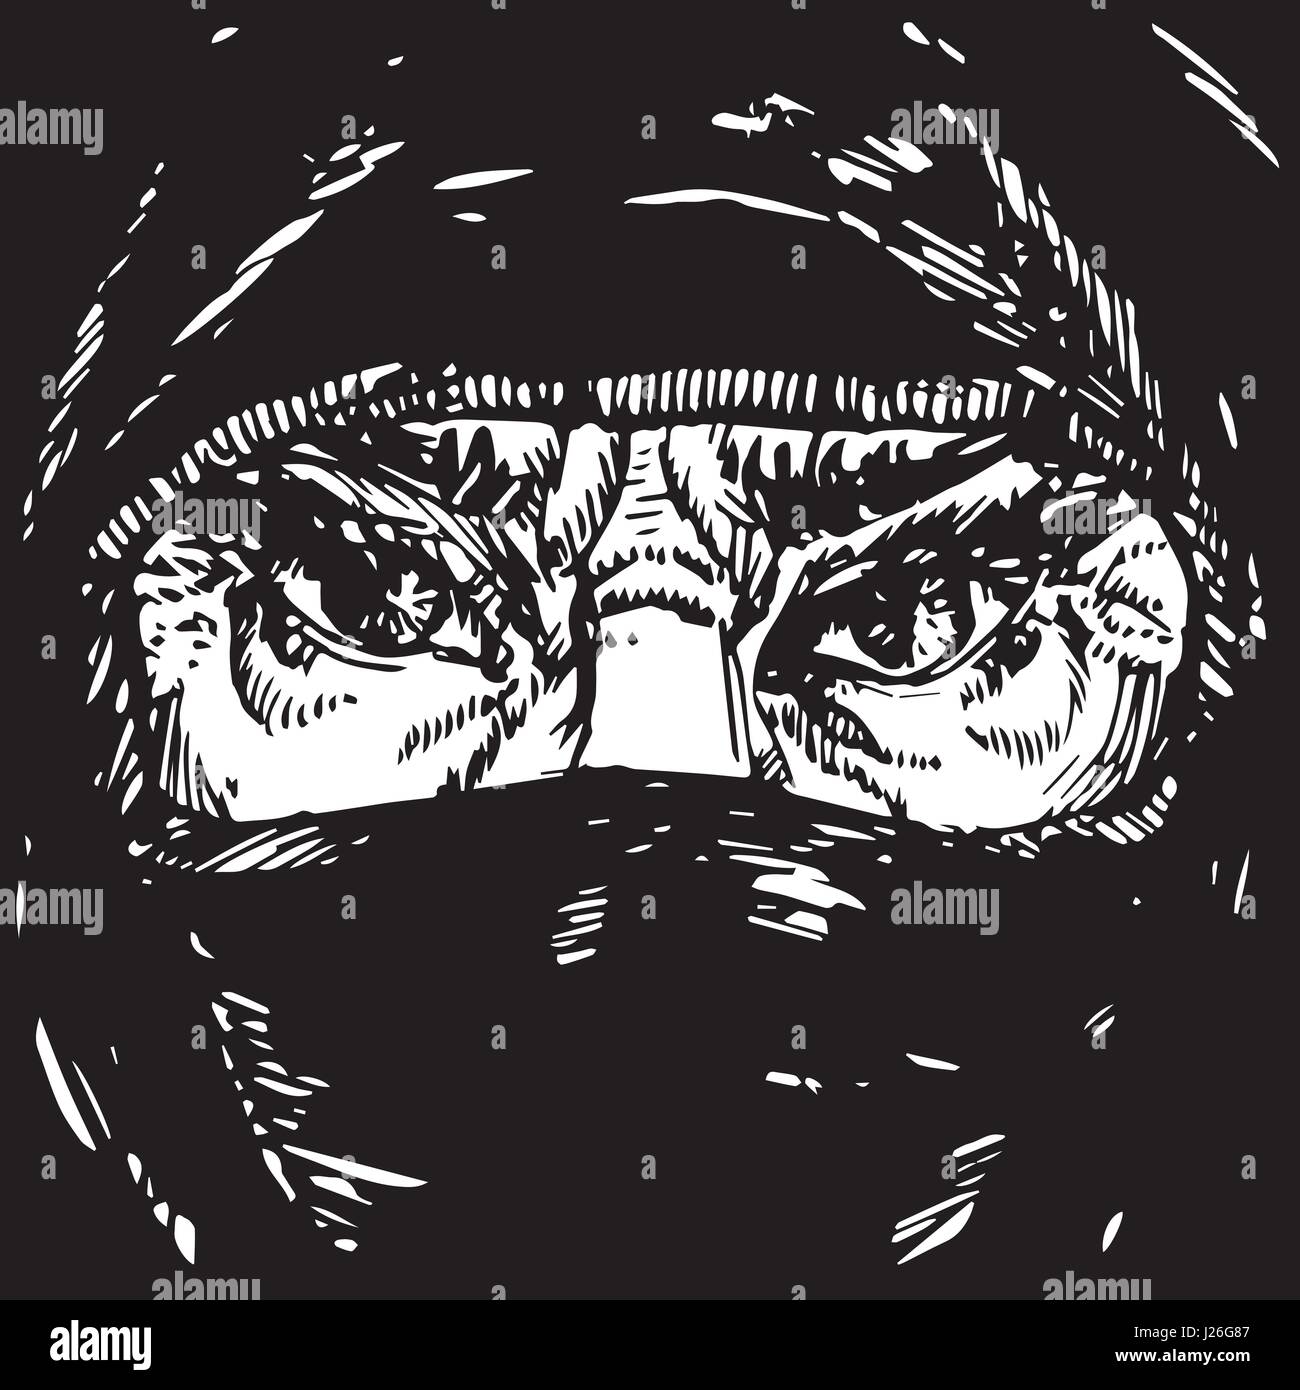 The face of the old Muslim woman with angry frowning eyebrows, face hidden in a black headscarf (hijab), black and white, illustration, ink drawing Stock Vector